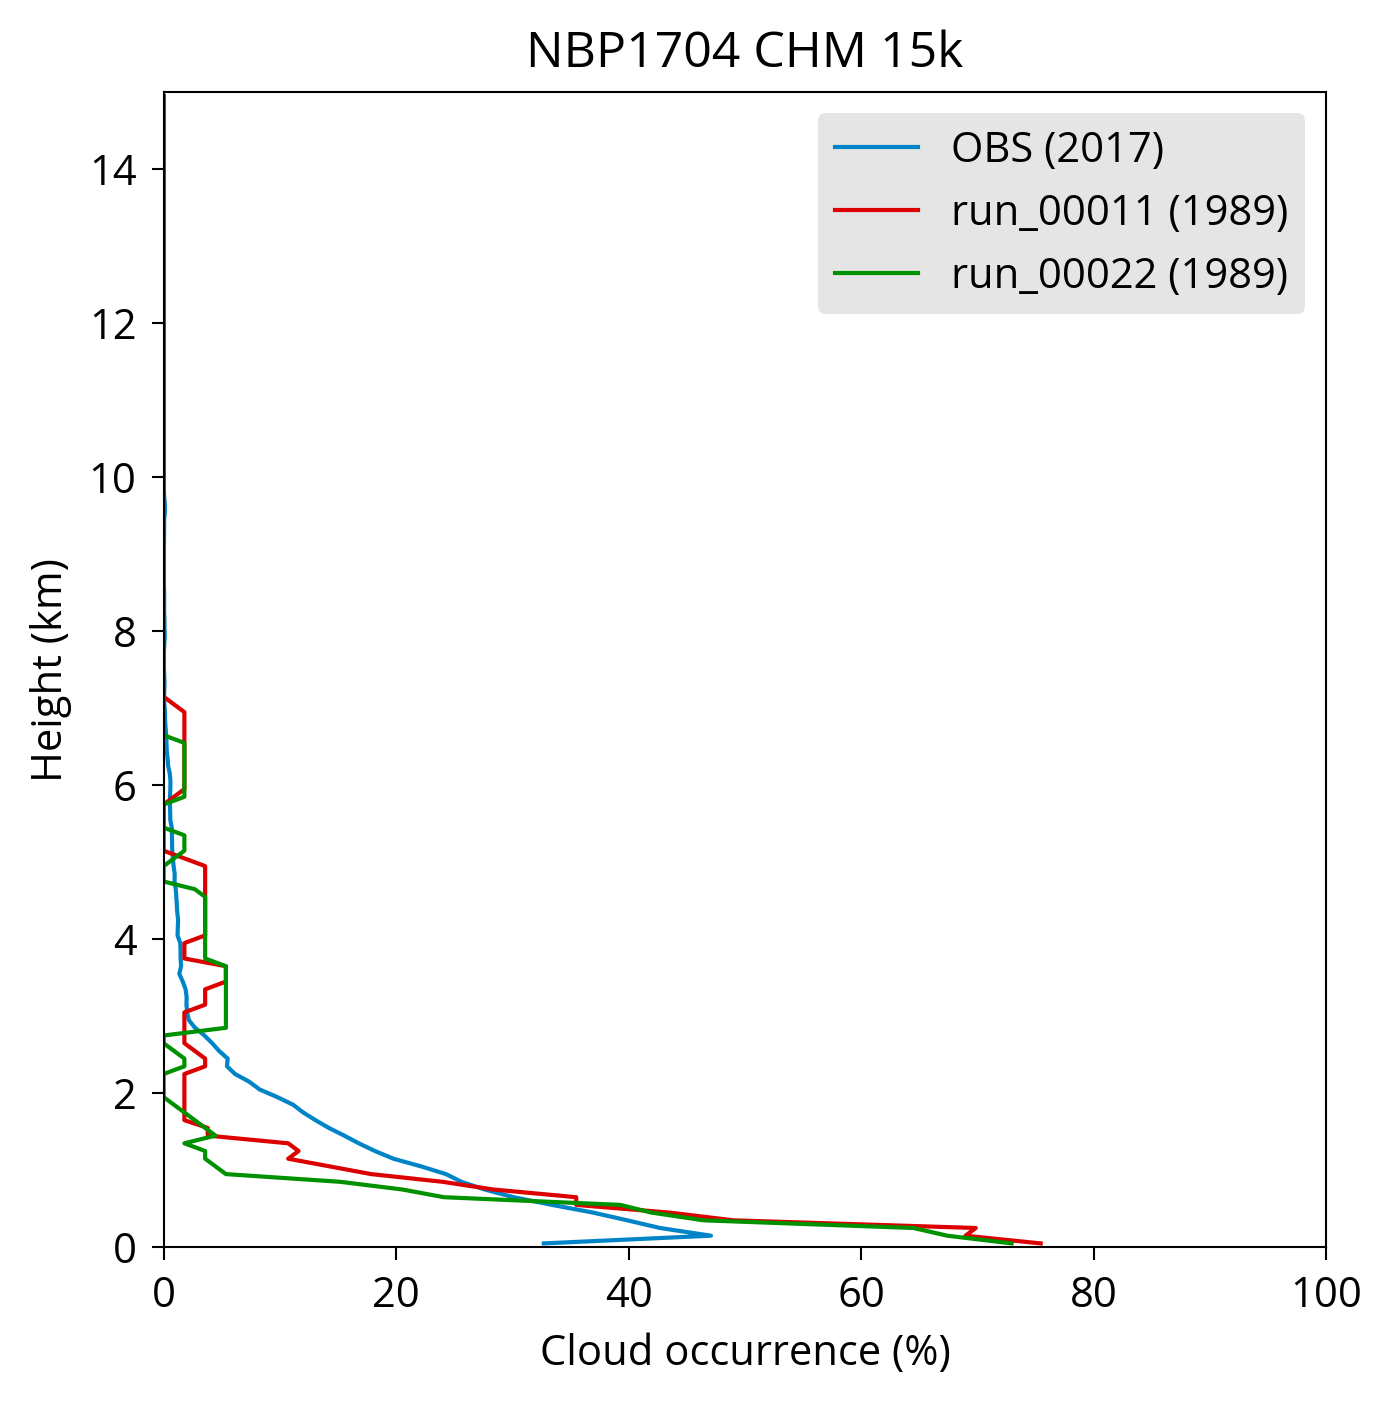 A plot of NBP1704 CHM 15k cloud occurrence by height